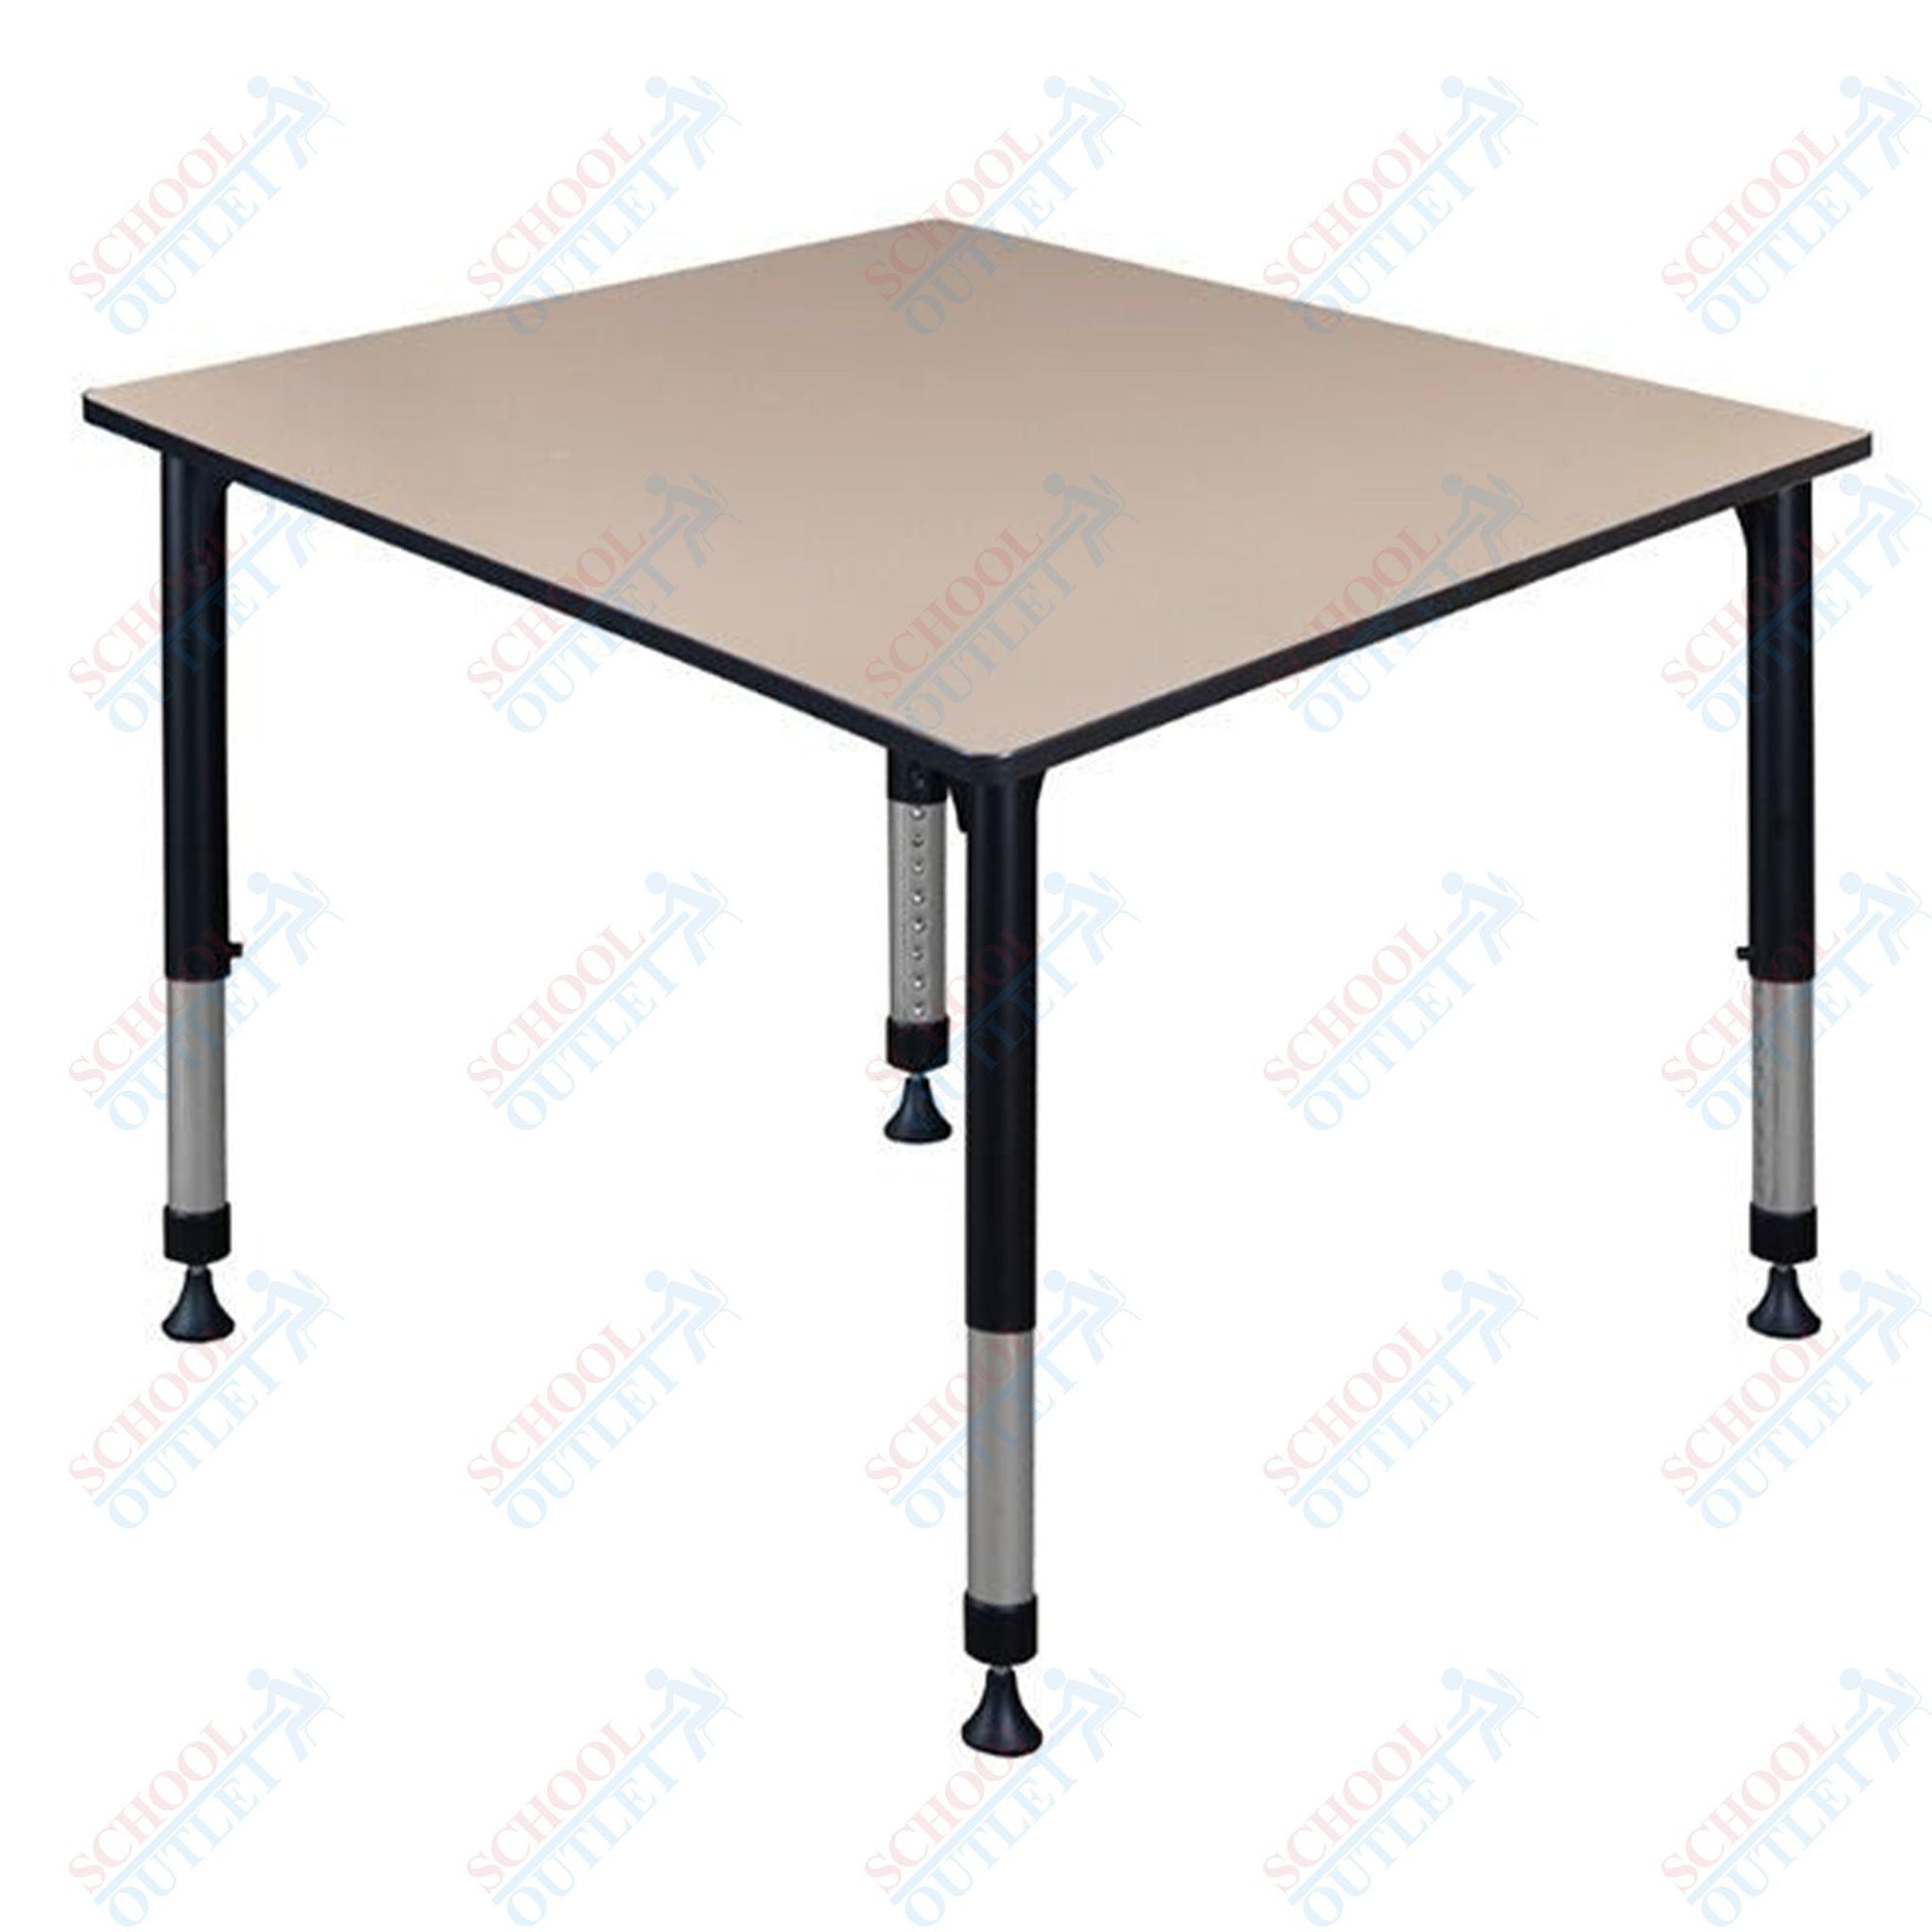 Regency Kee 48 in. Square Height Adjustable Classroom Activity Table - SchoolOutlet